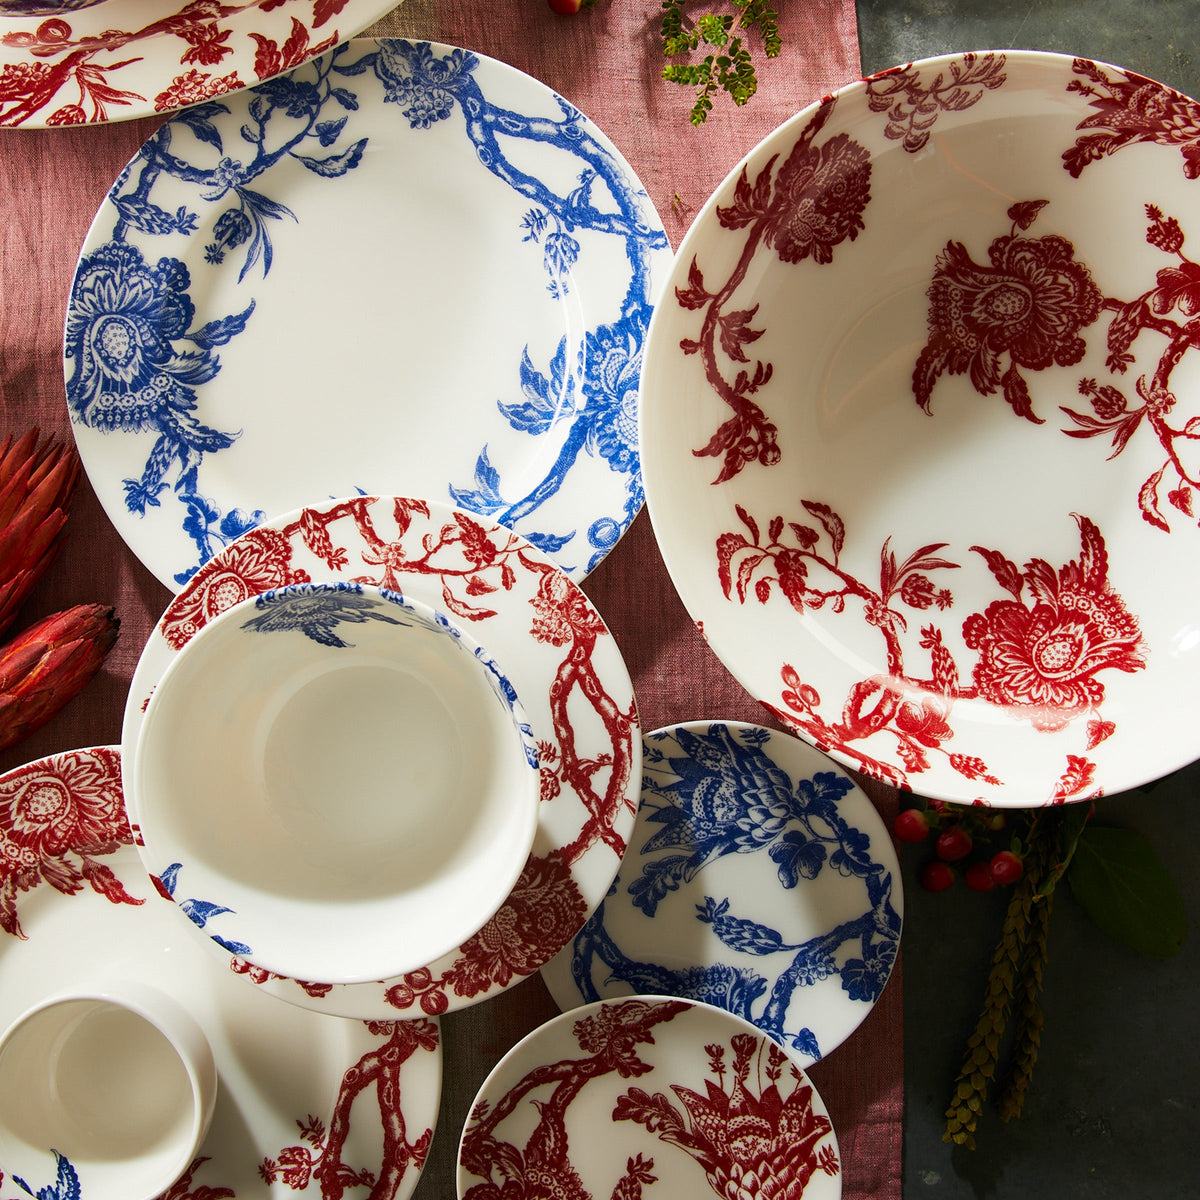 A mix of Arcadia blue and crimson premium porcelain from Caskata is displayed on a red tablecloth.